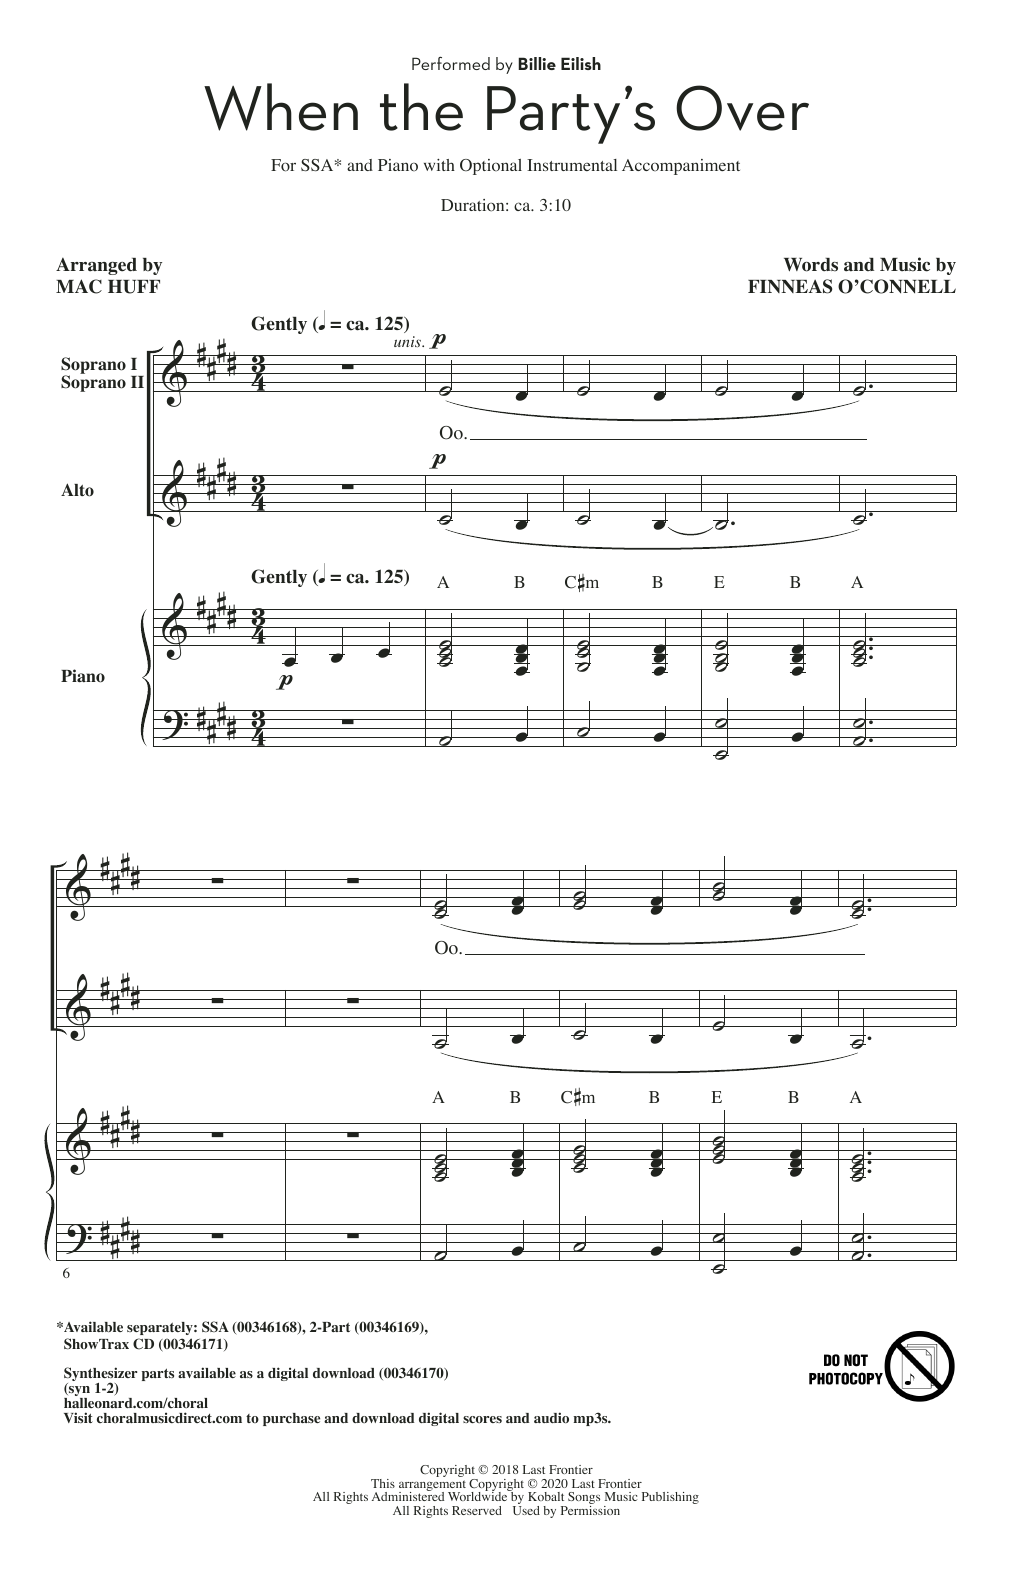 Download Billie Eilish when the party's over (arr. Mac Huff) Sheet Music